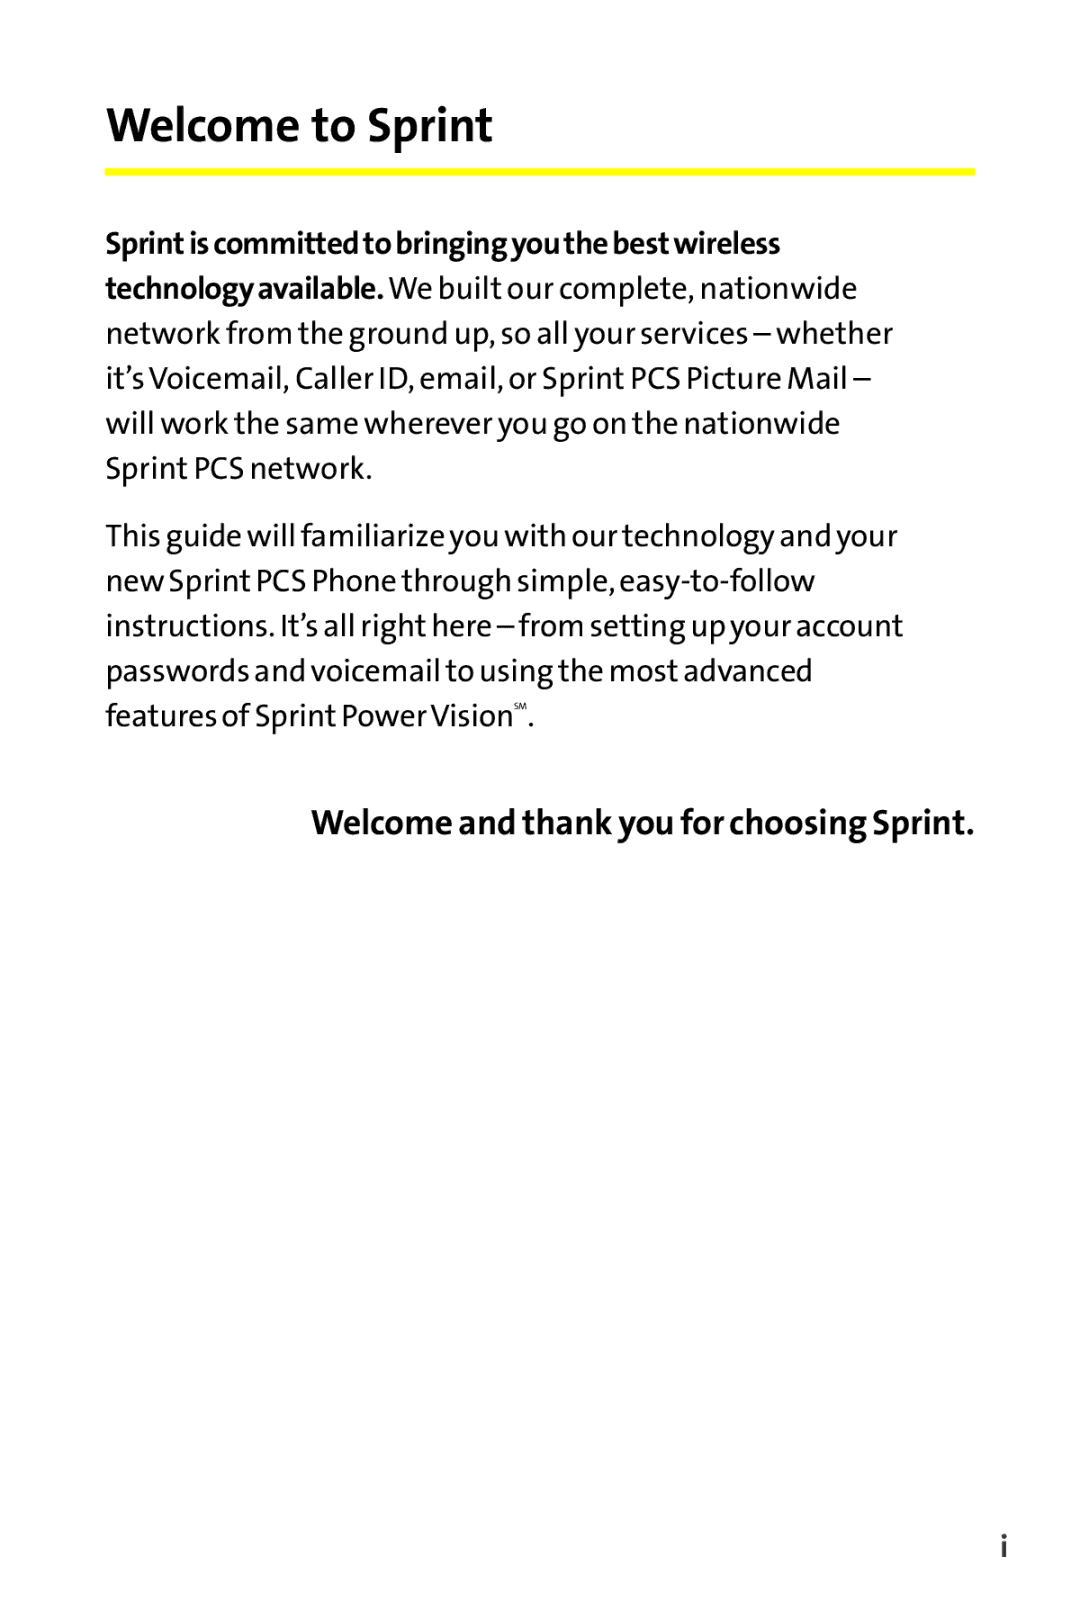 Sanyo MM-9000 manual Welcome and thank you for choosing Sprint, Sprintiscommittedtobringingyouthebestwireless 